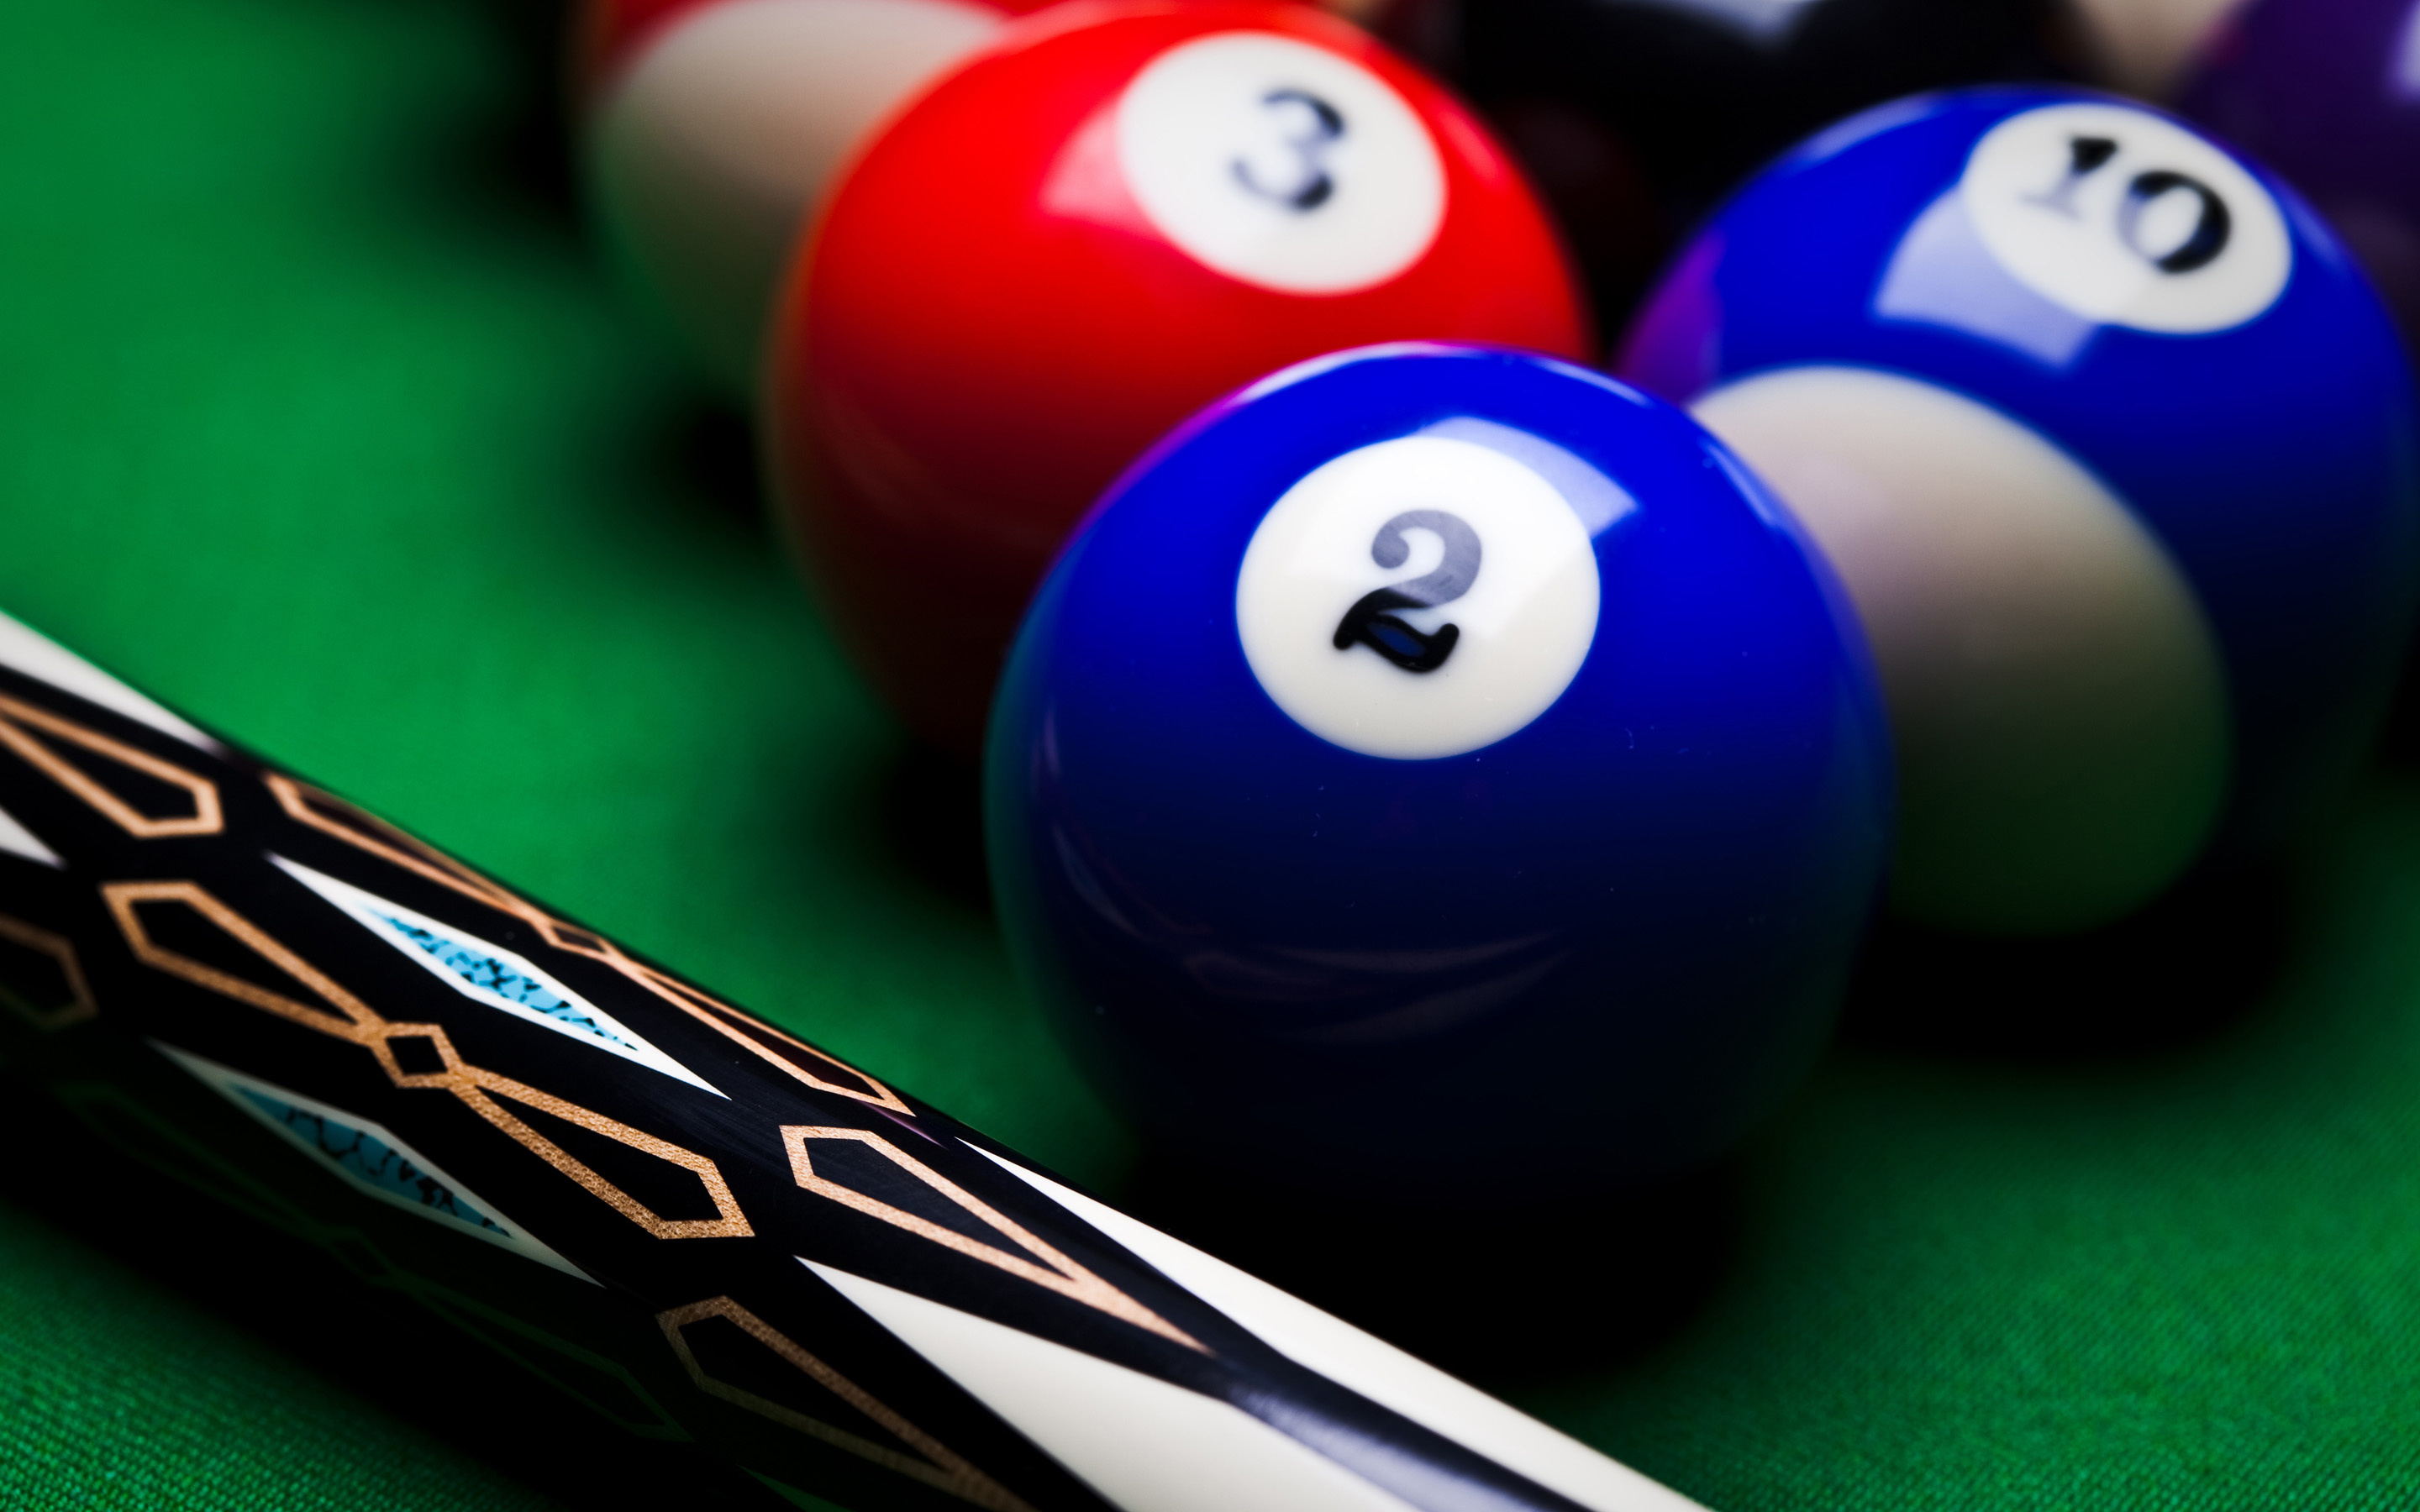 Billiards: Eight-ball style of a cue sport, Fifteen object balls with a cue stick, Billiards ball. 2880x1800 HD Wallpaper.